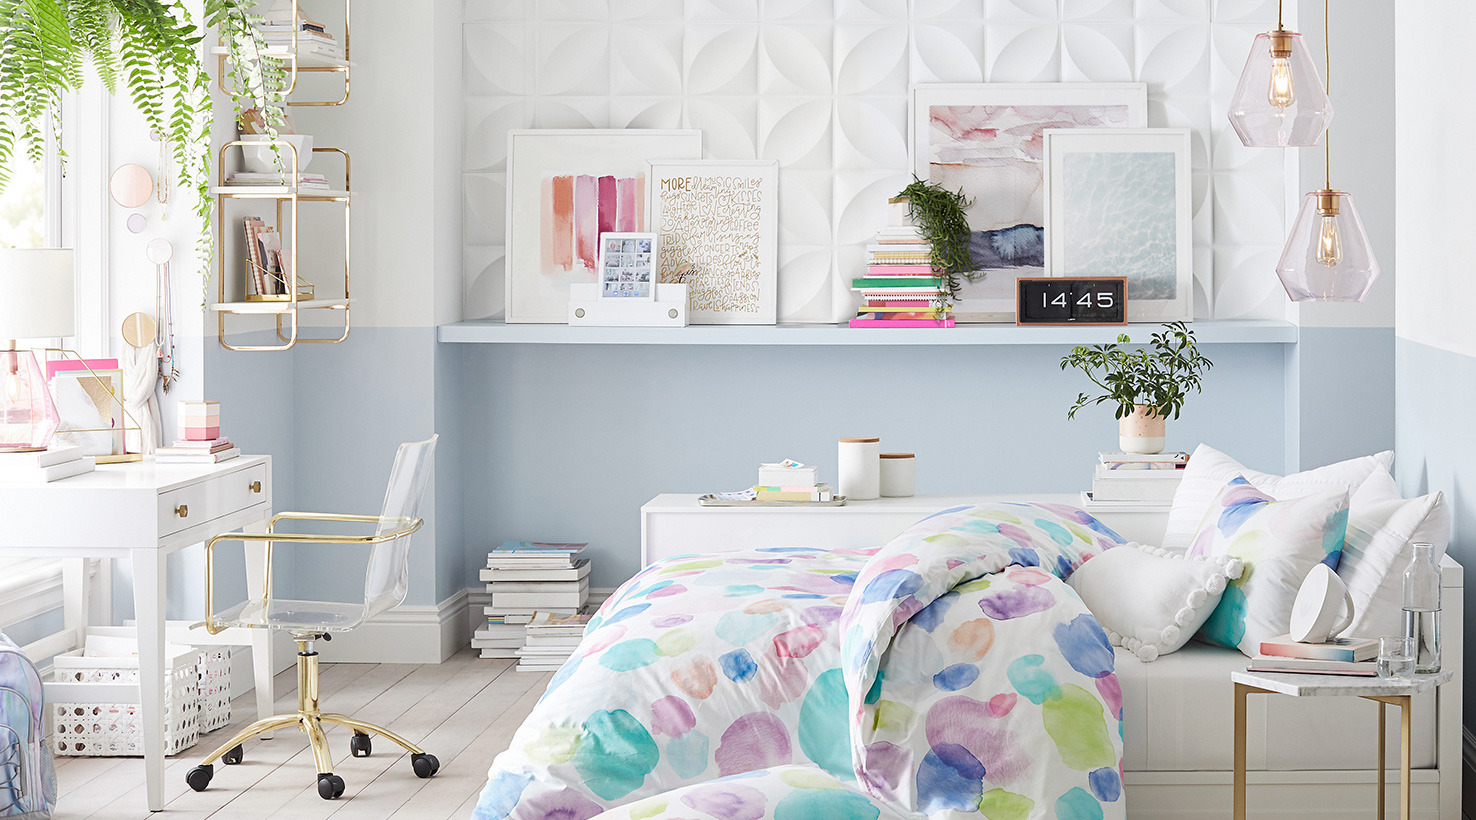 Teen Room Paint Color Ideas Inspiration Gallery Sherwin Williams